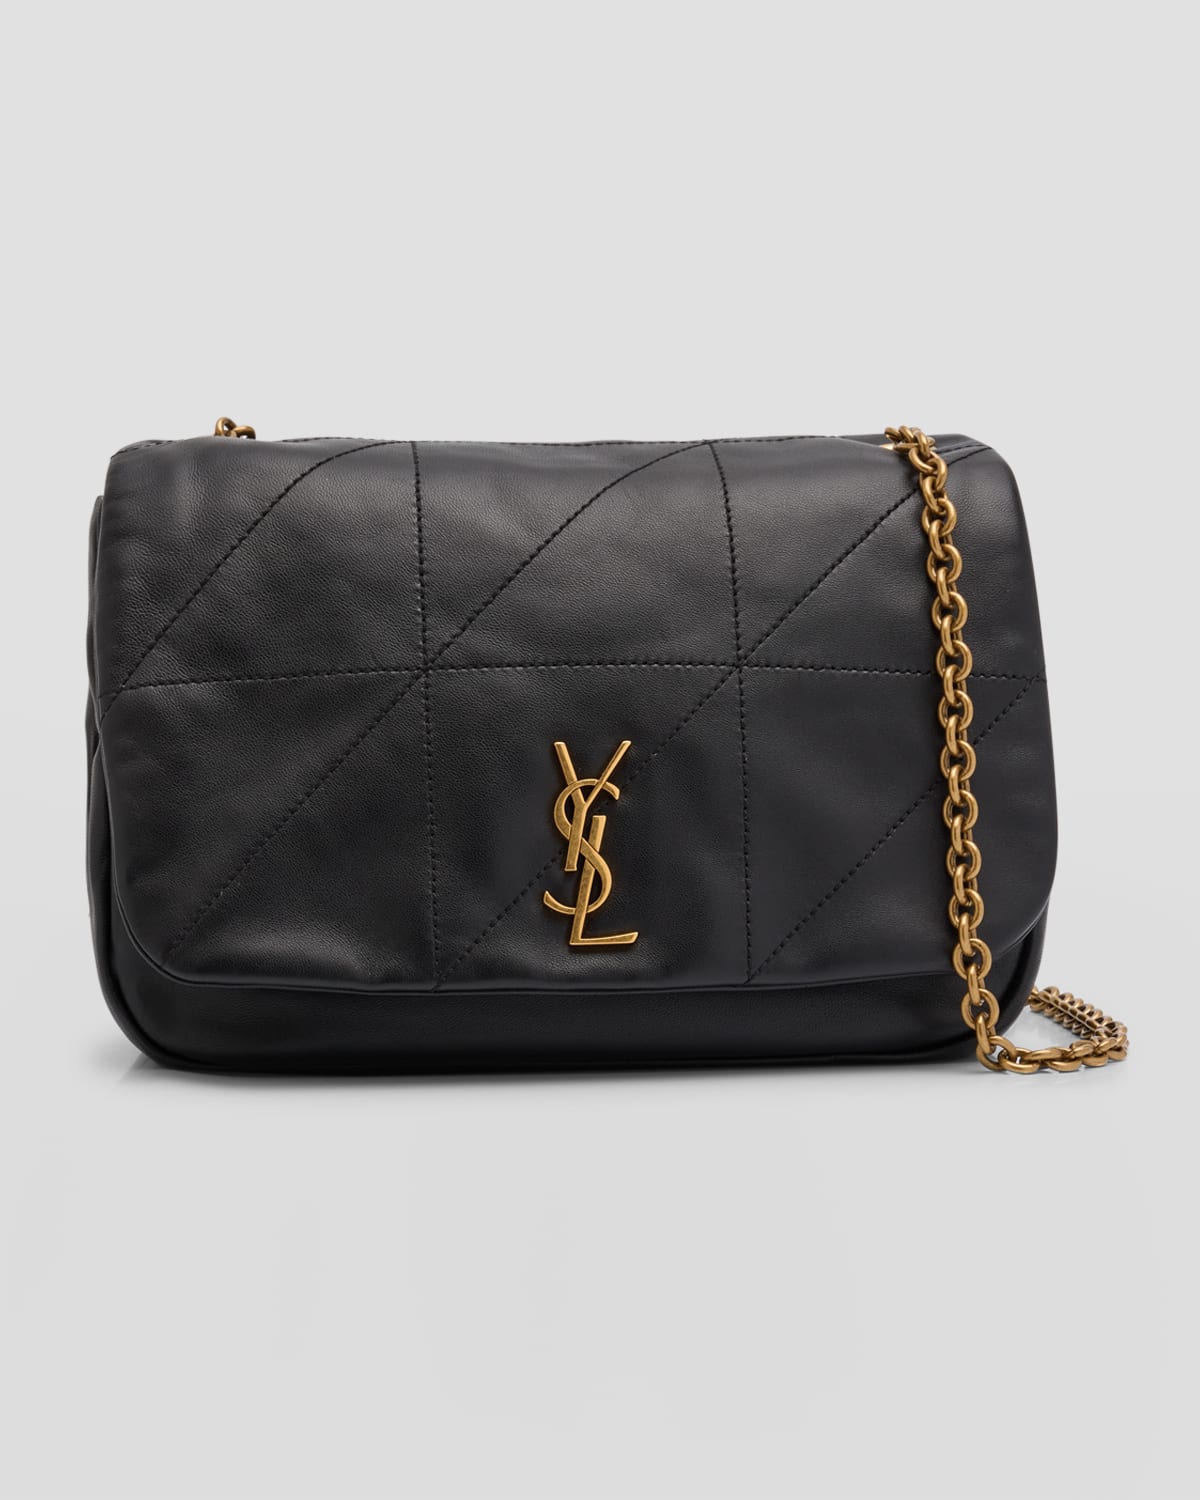 SAINT LAURENT JAMIE 4.3 SMALL YSL SHOULDER BAG IN QUILTED SMOOTH LEATHER